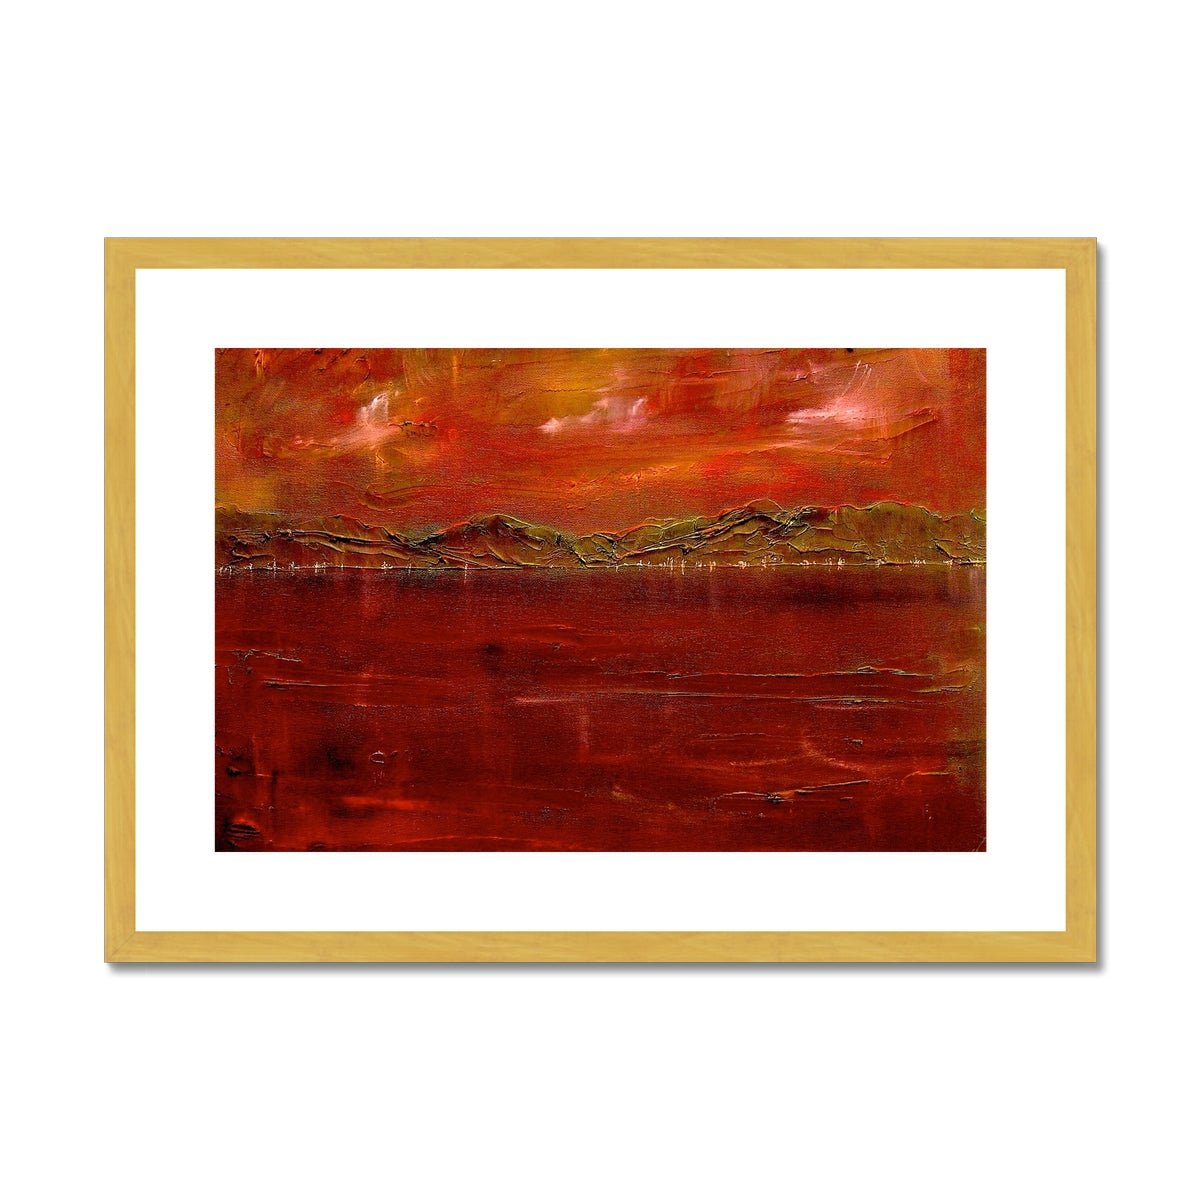 Deep Clyde Dusk Painting | Antique Framed & Mounted Prints From Scotland-Antique Framed & Mounted Prints-River Clyde Art Gallery-A2 Landscape-Gold Frame-Paintings, Prints, Homeware, Art Gifts From Scotland By Scottish Artist Kevin Hunter